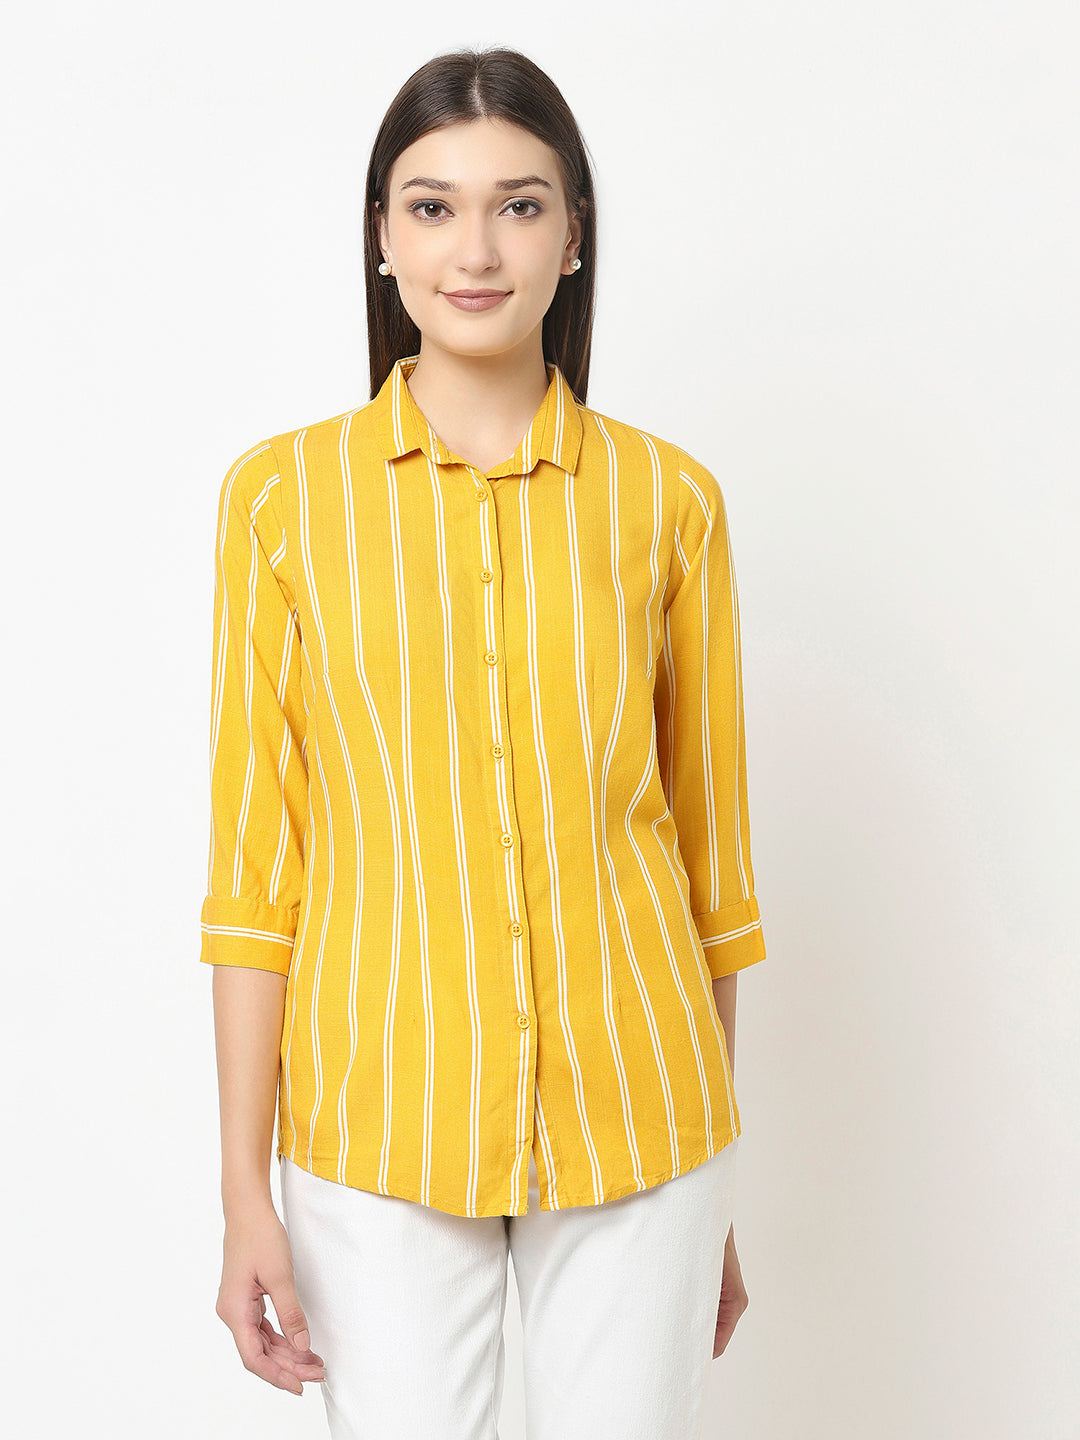 Striped Yellow Shirt in Cotton